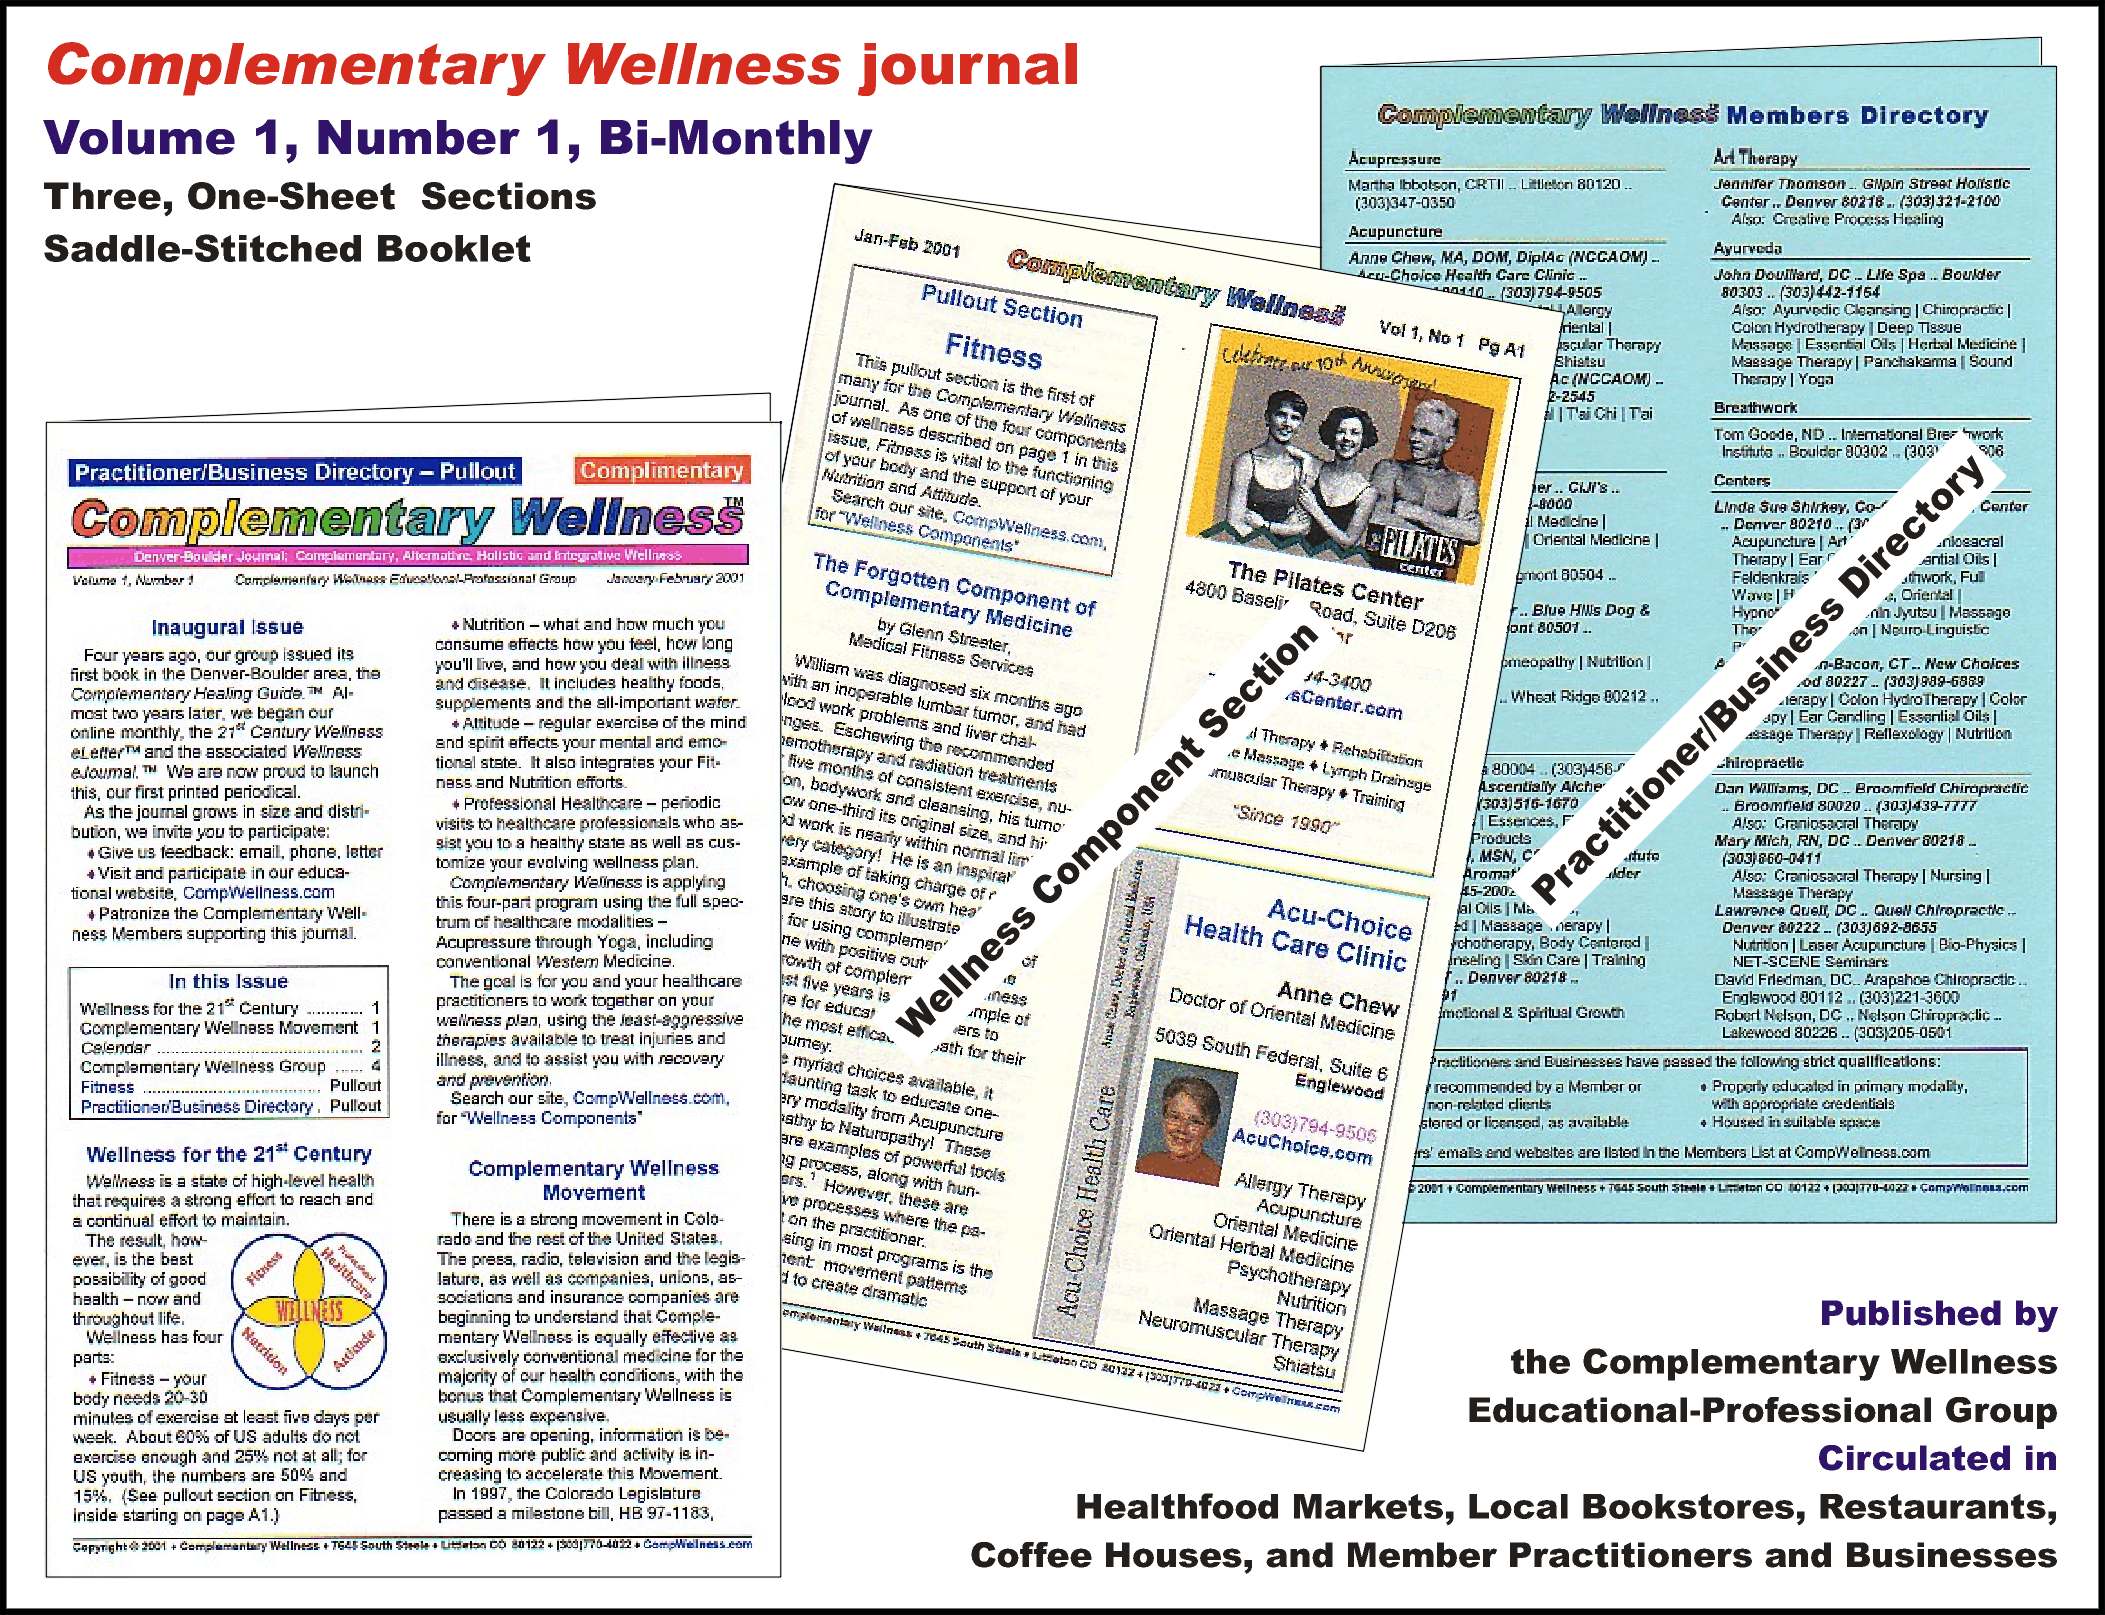 CompWellness Journal High-Density Layout - Click for Lower Density